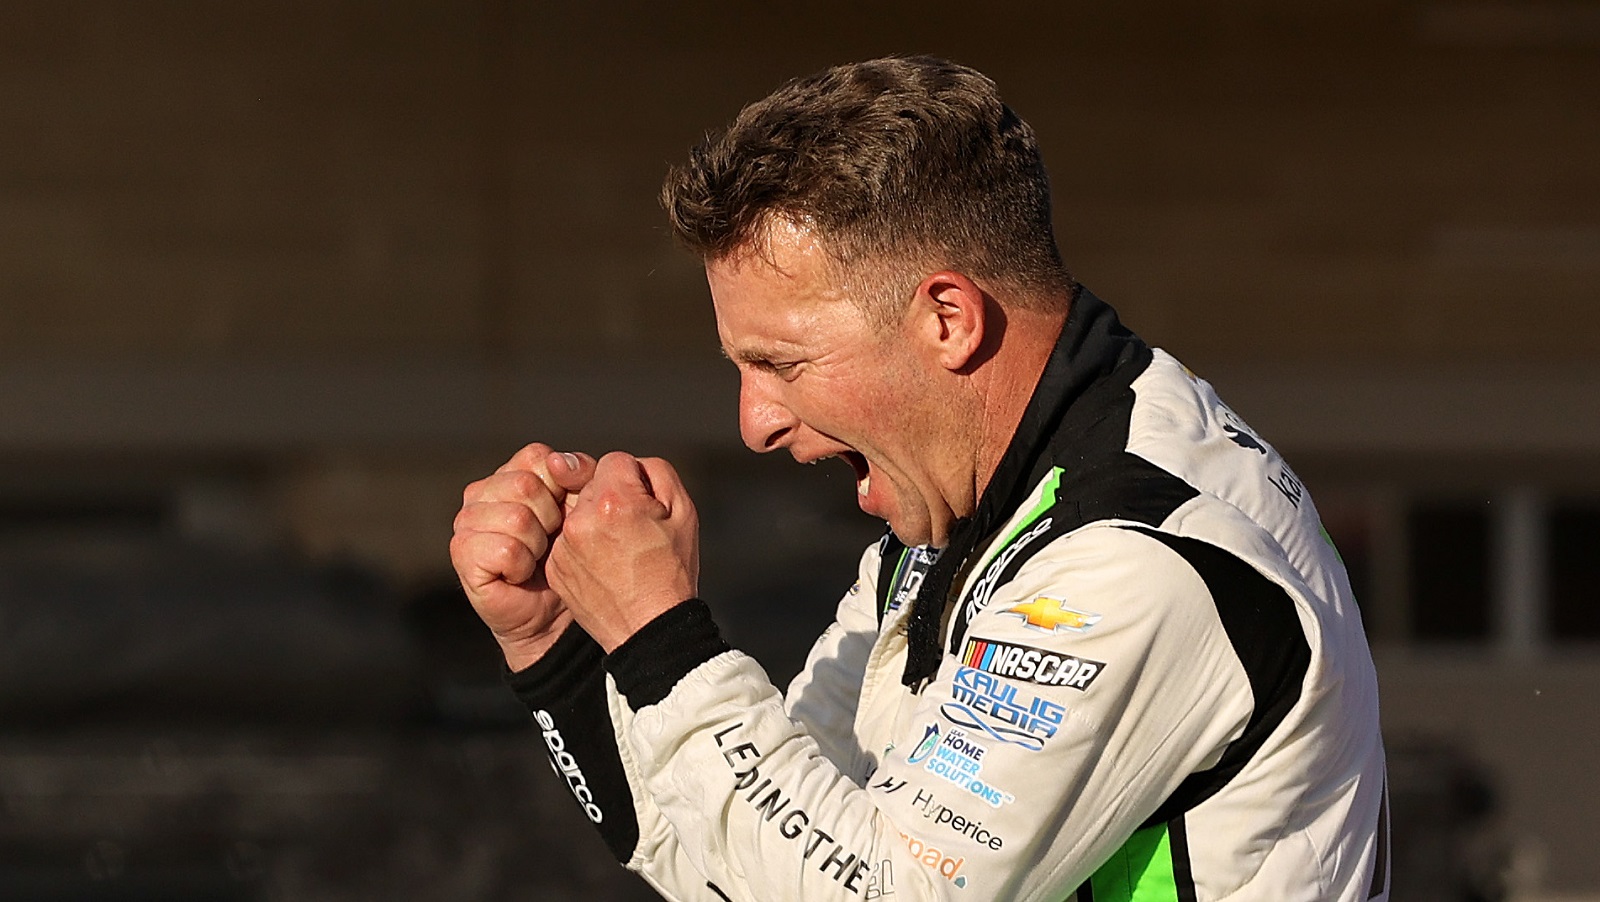 AJ Allmendinger celebrates after winning the NASCAR Xfinity Series Pit Boss 250 at Circuit of The Americas on March 26, 2022 in Austin, Texas. | Dylan Buell/Getty Images